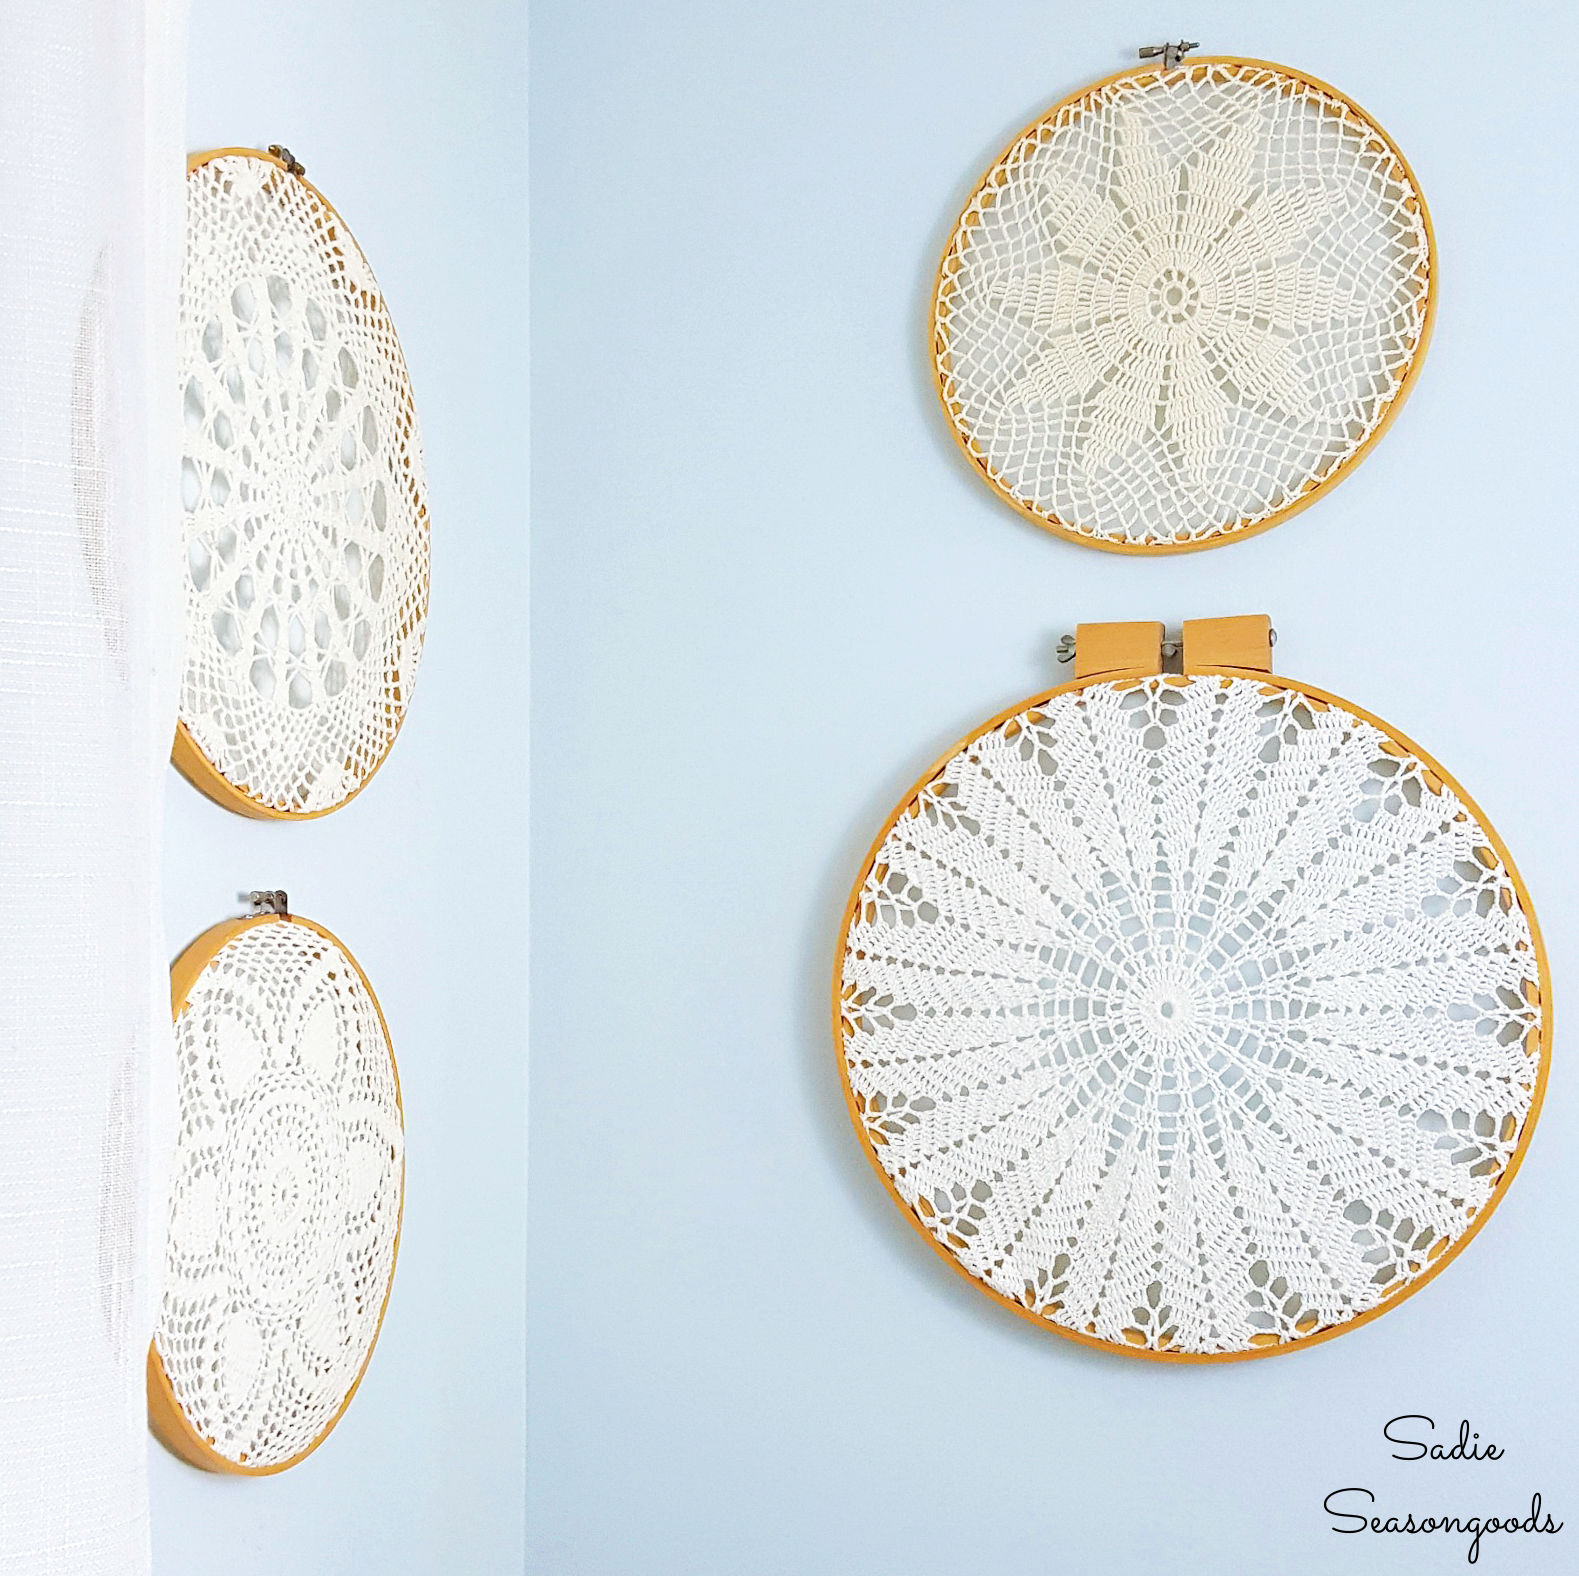 How to Create an Embroidery Hoop Ornament - YouTube